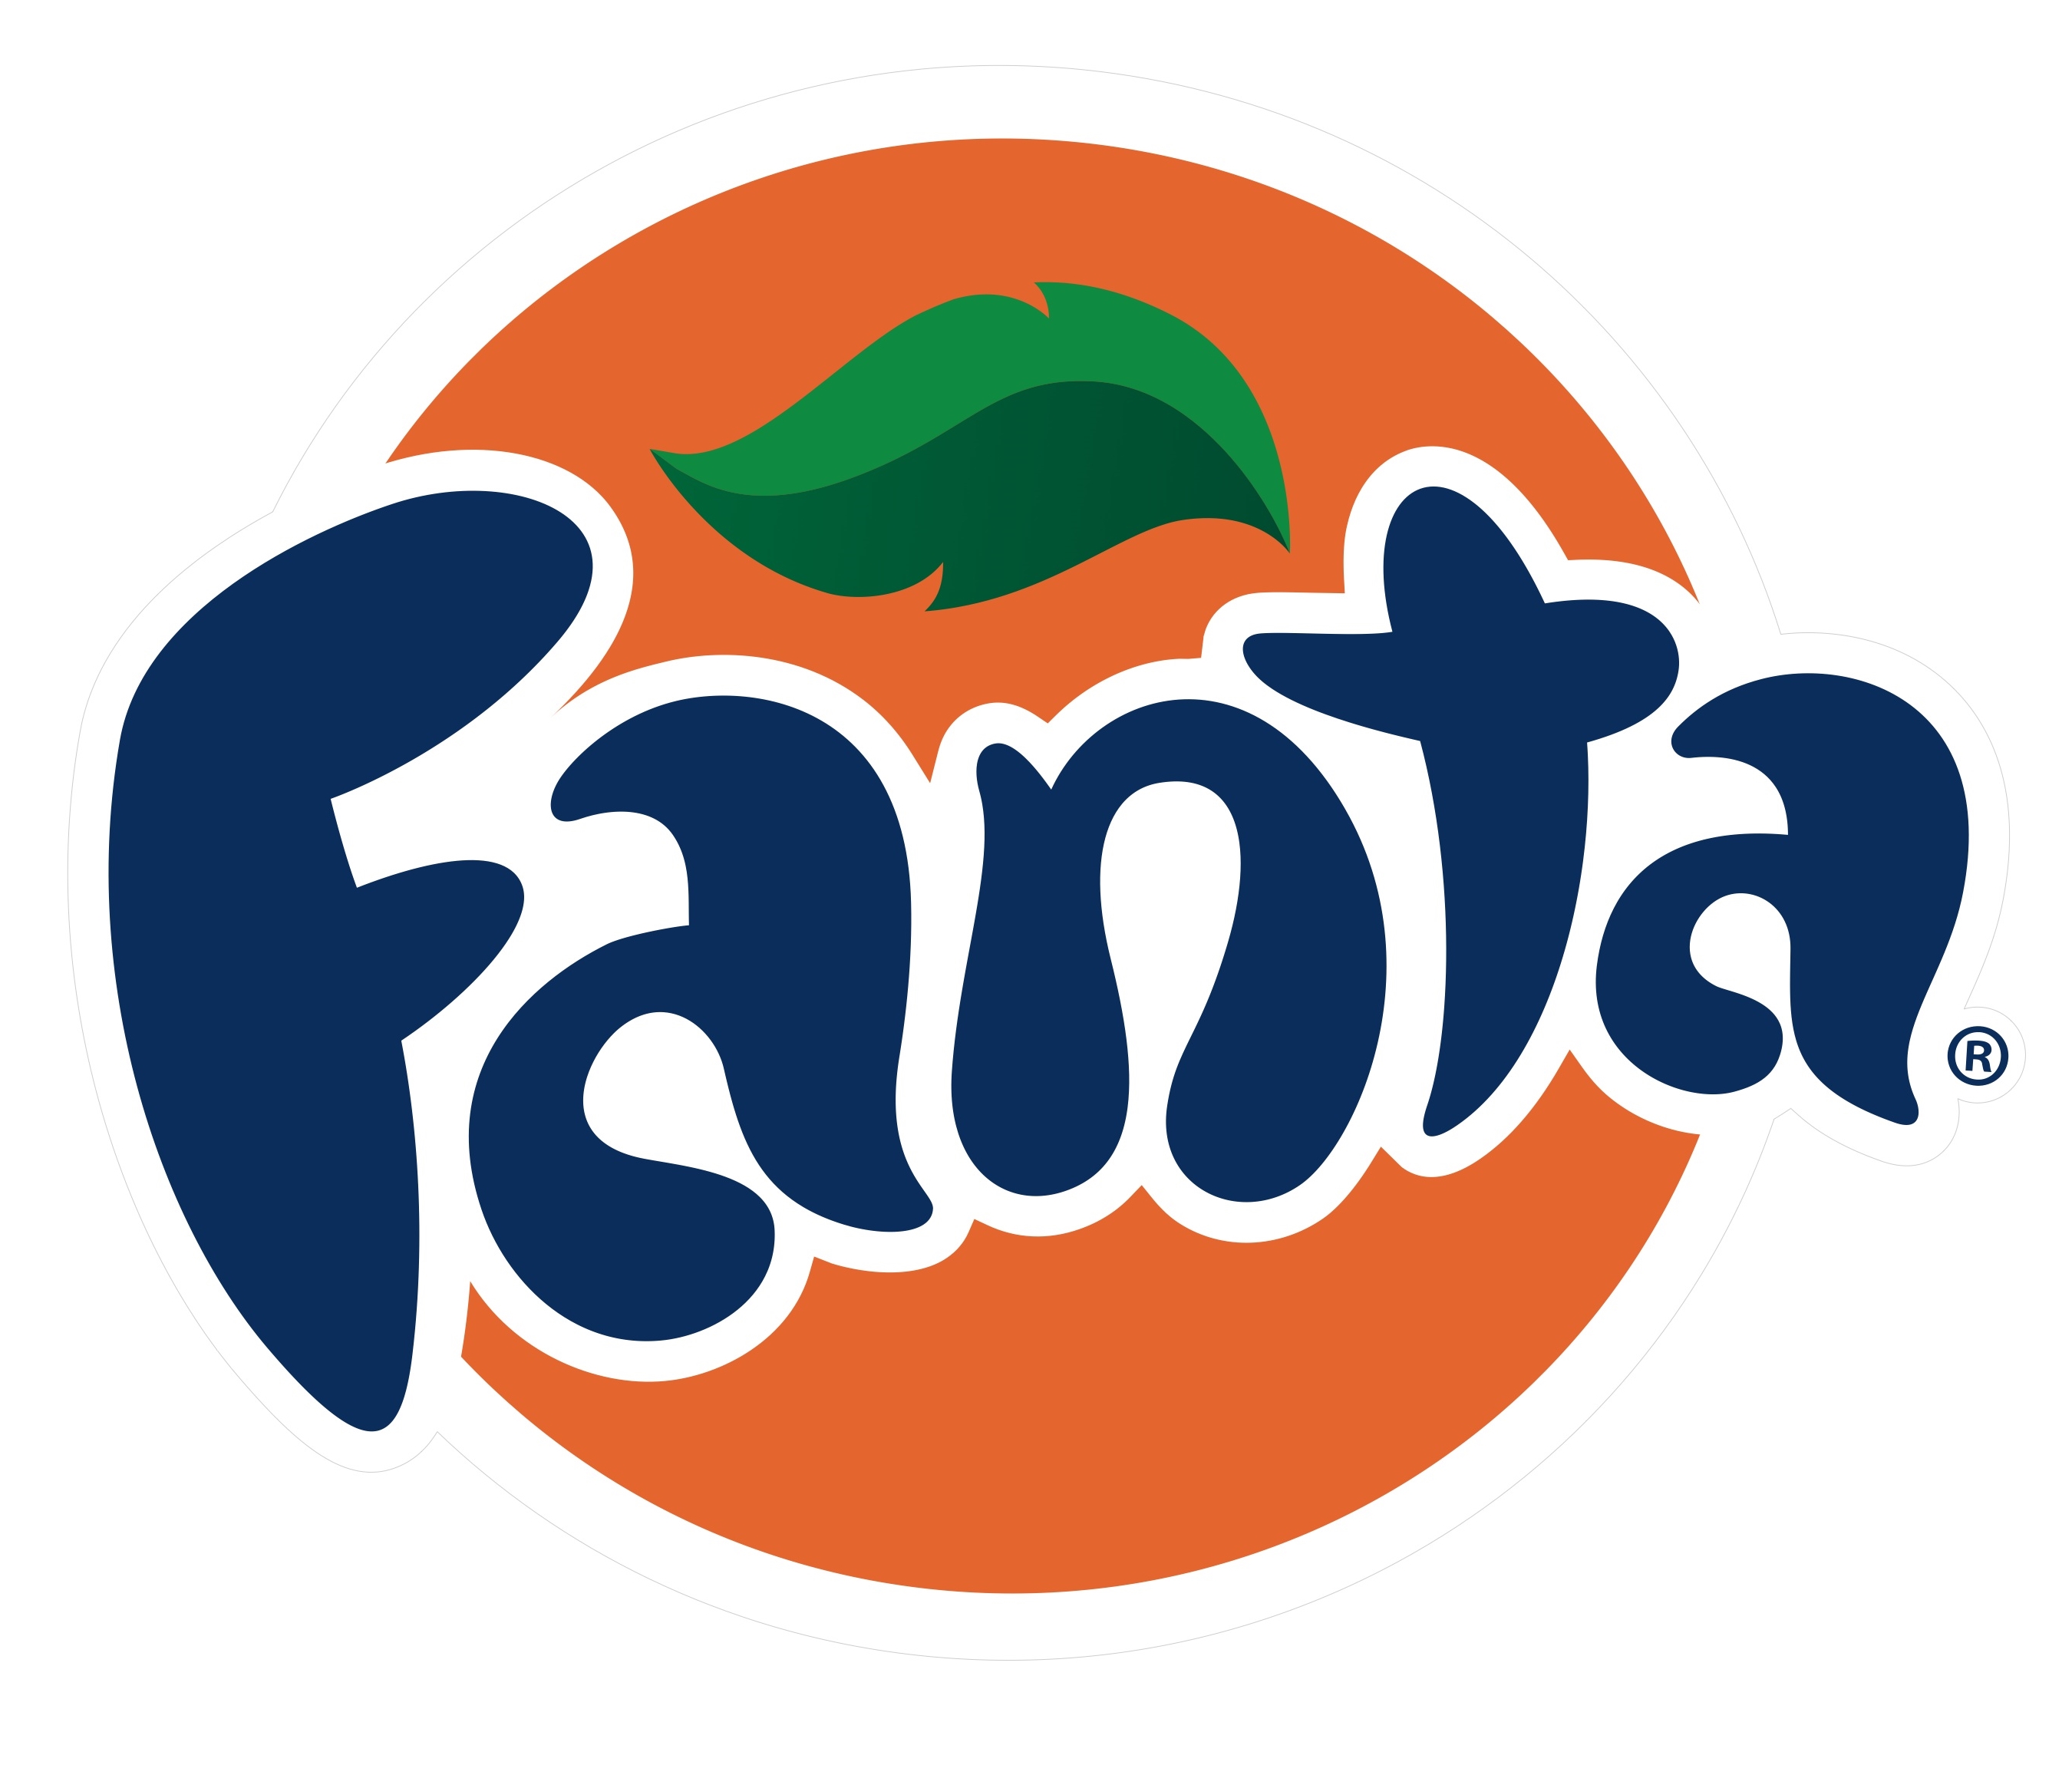 Fanta logo, logotype. All logos, emblems, brands pictures gallery.